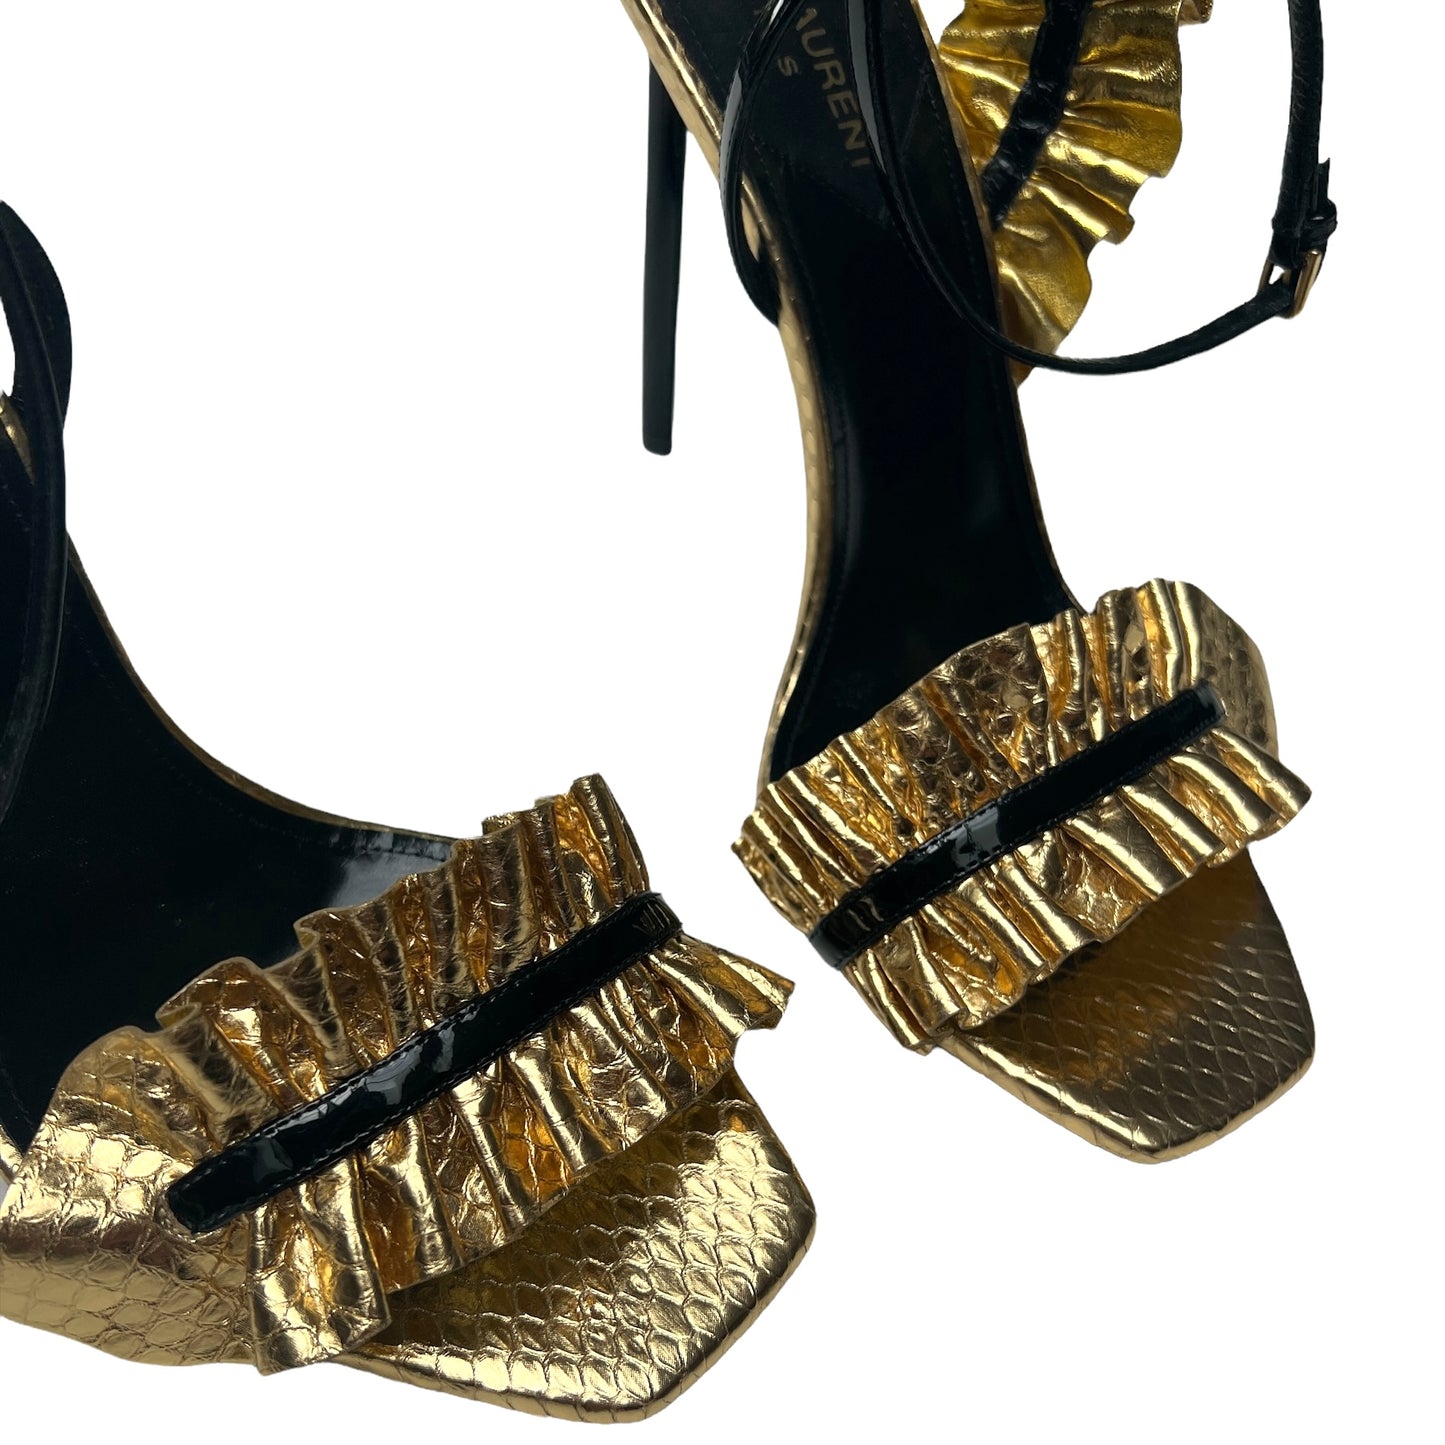 Black and Gold High Heels - 8.5